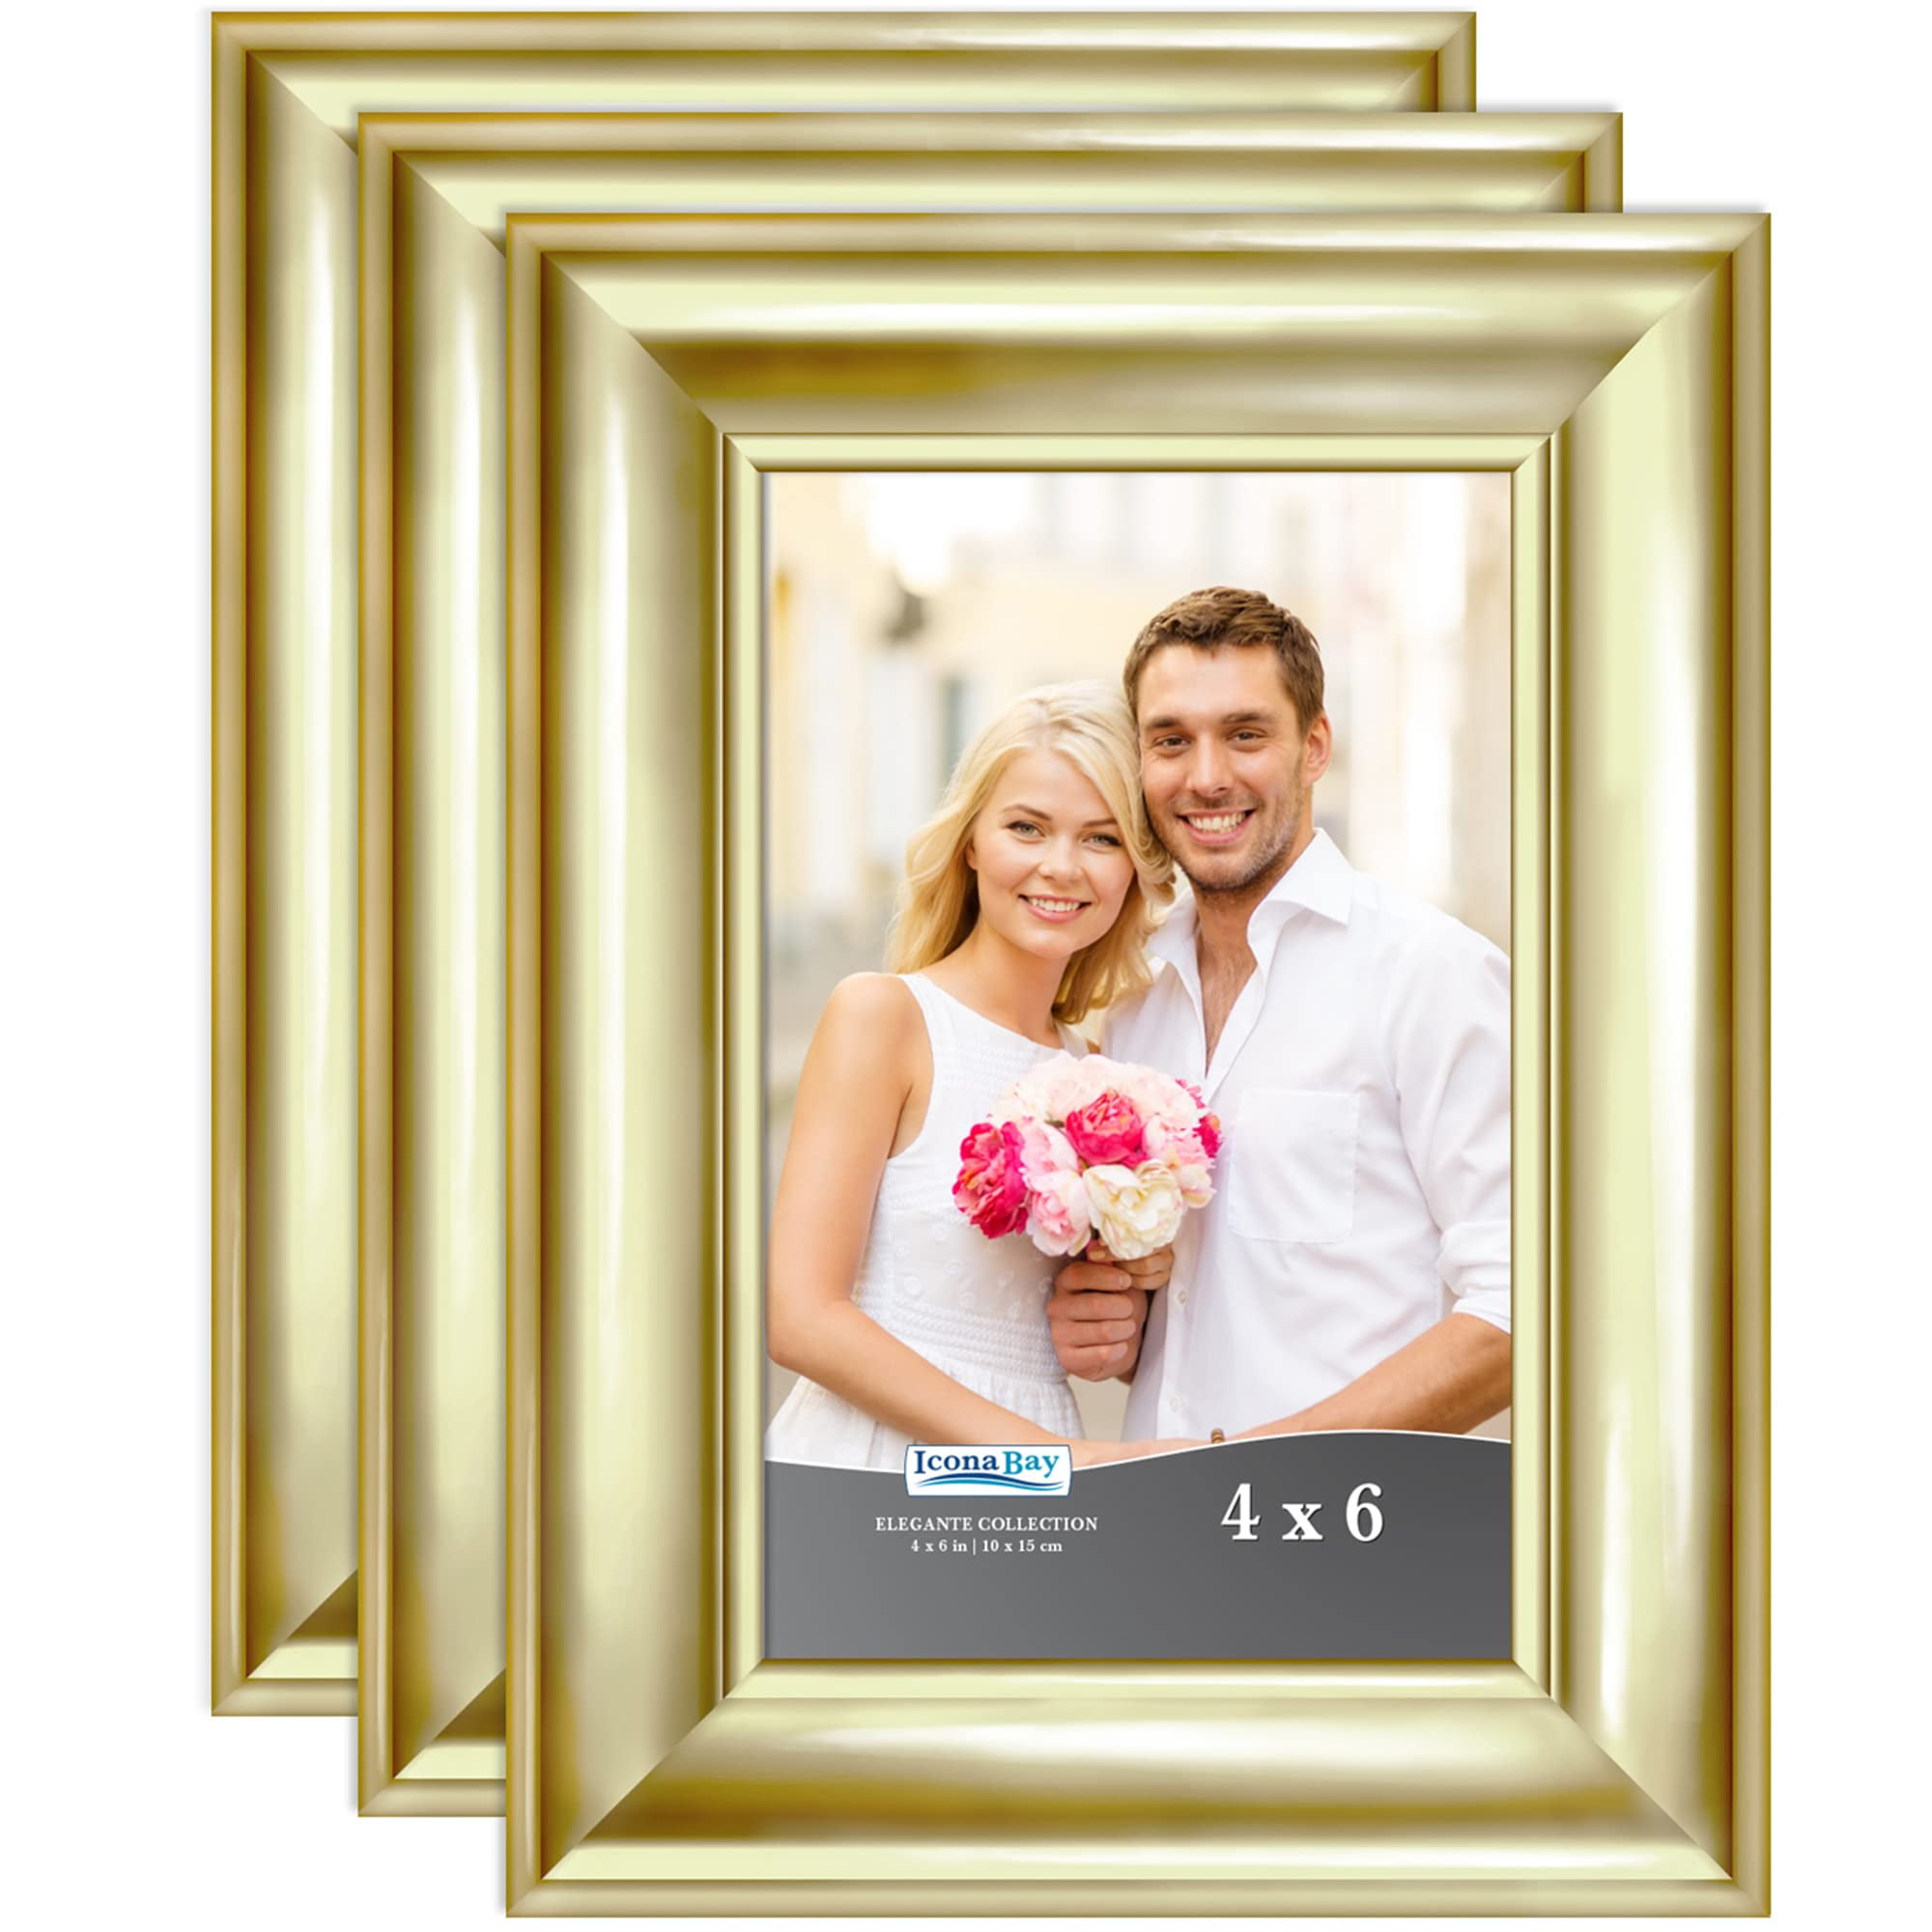 Langdon House 4x6 Picture Frames (Almond White, 3 Pack) Wood Grain Style, Wall Mount or Table Top, Richland Collection